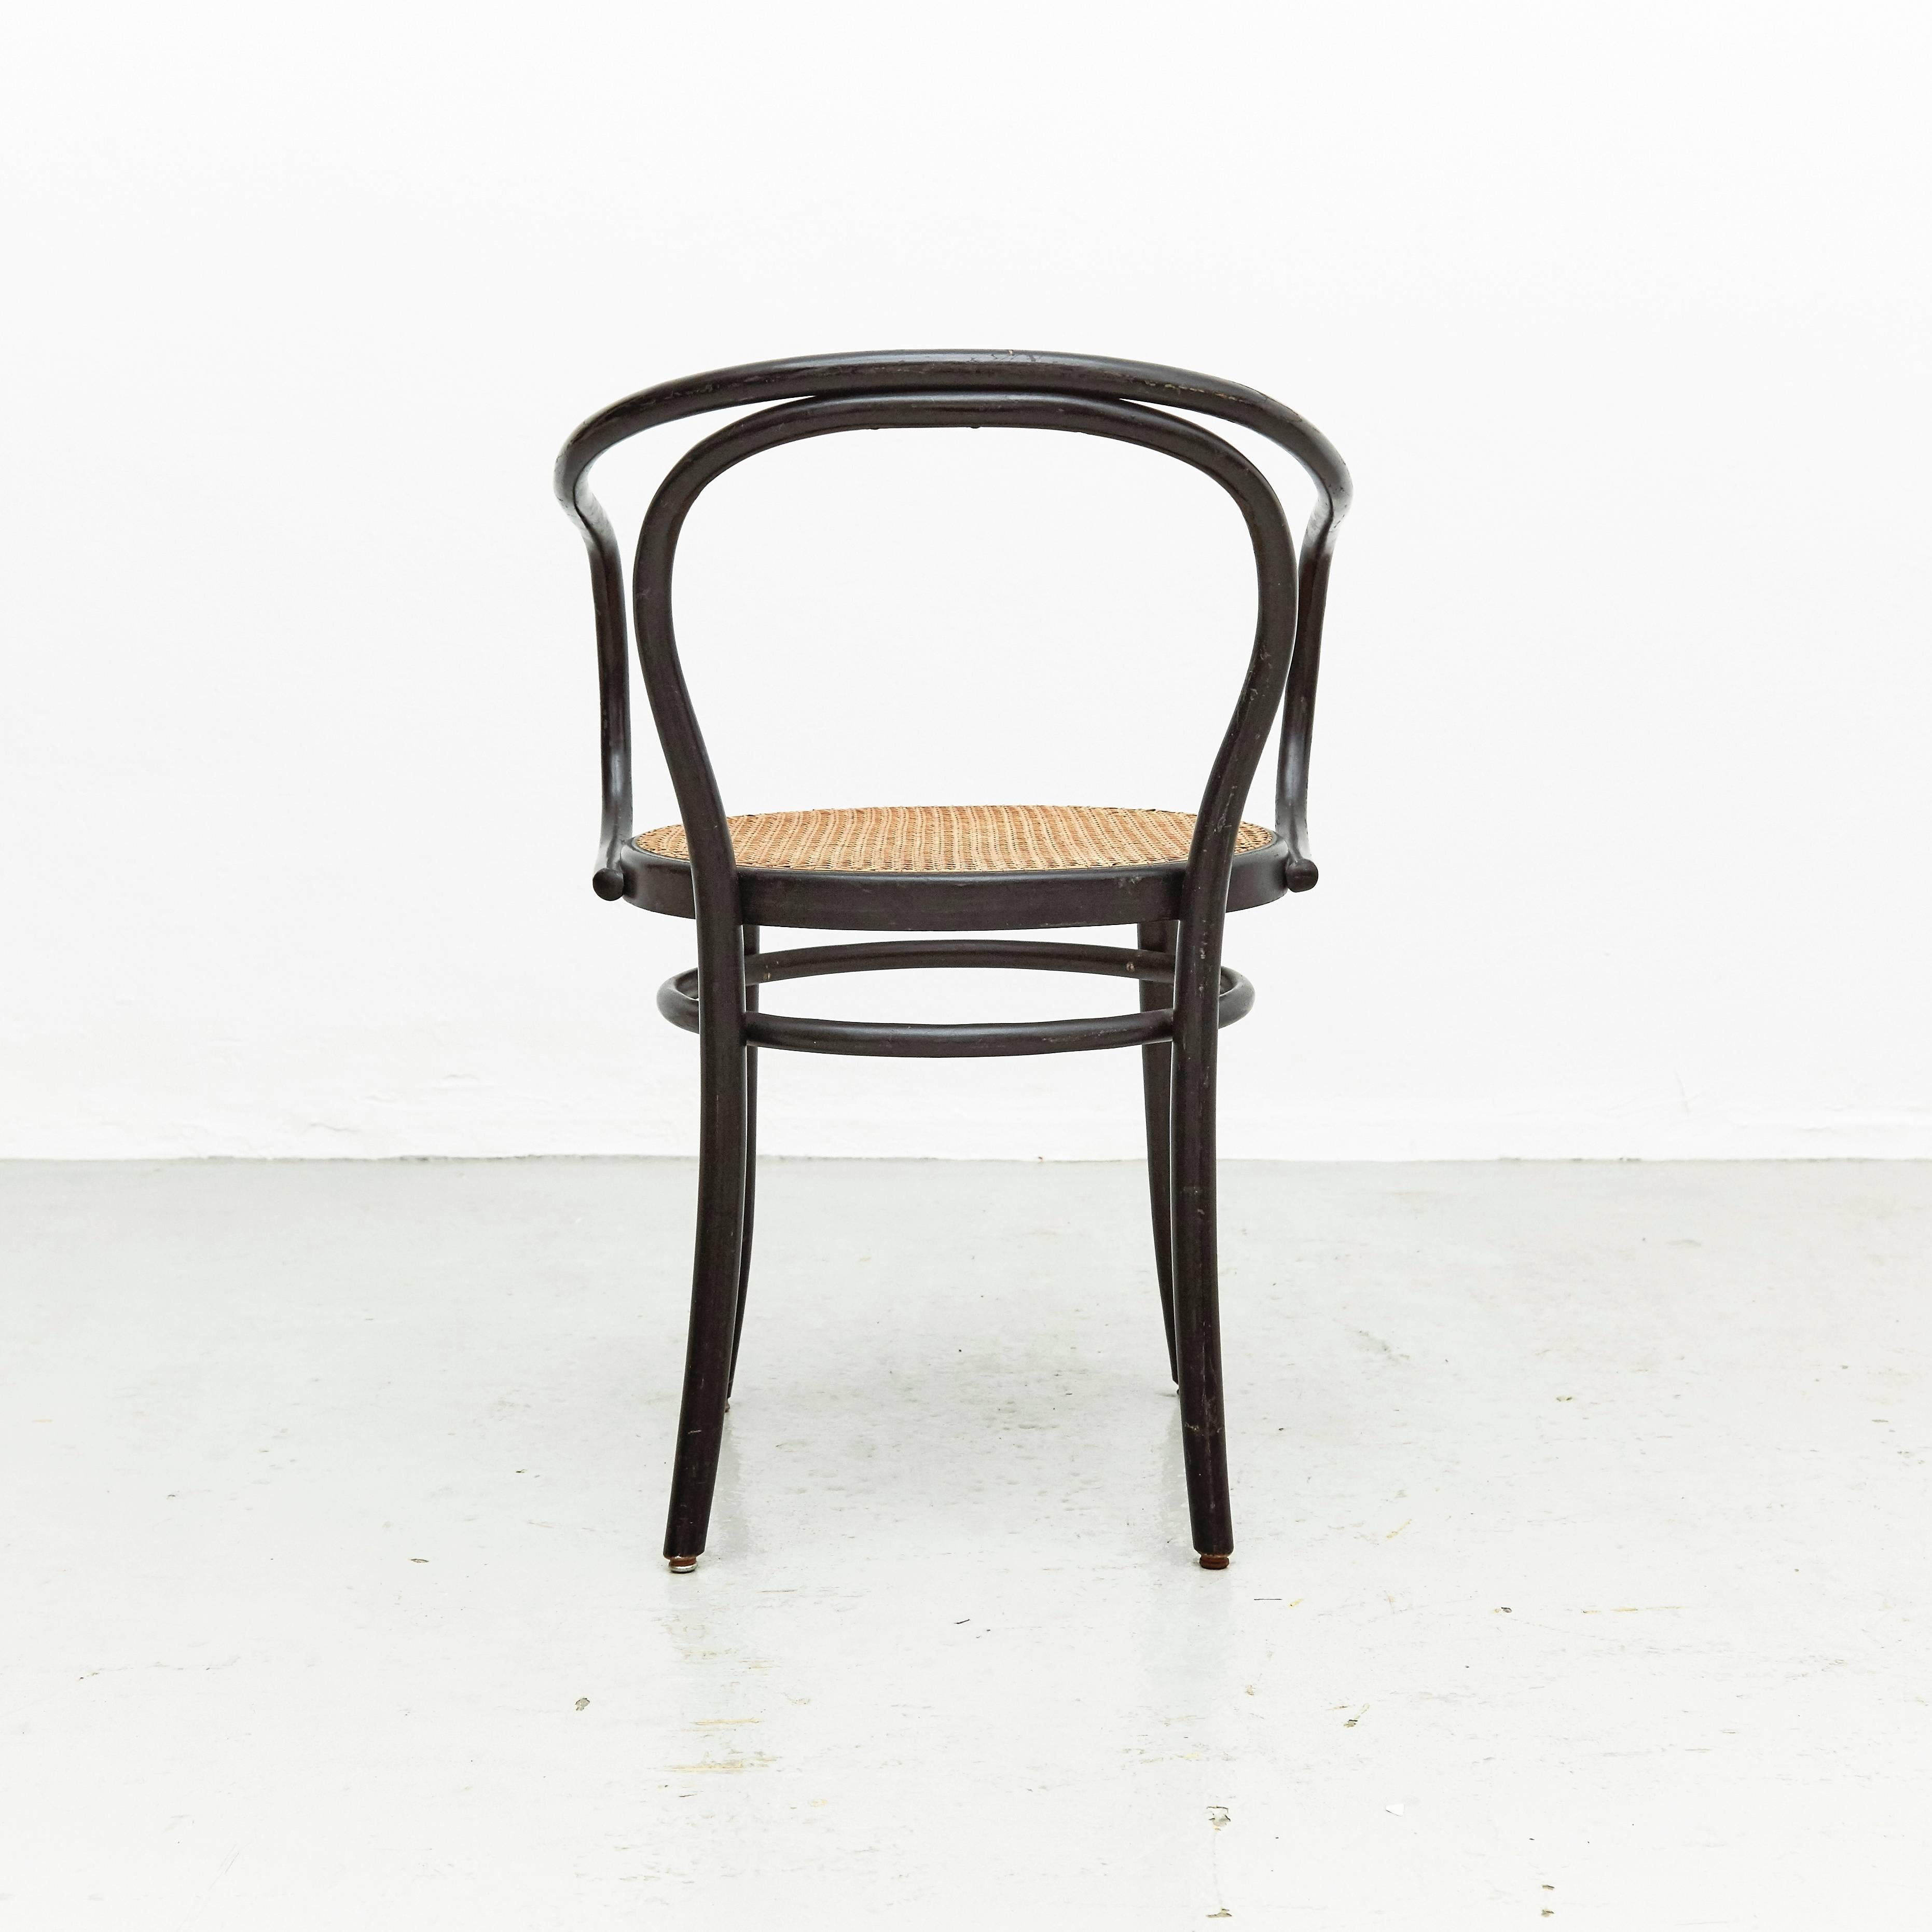 Armchair designed in the style of Thonet, made by unknown manufacturer, circa 1940.

In good original condition, preserving a beautiful patina, with minor wear consistent with age and use.